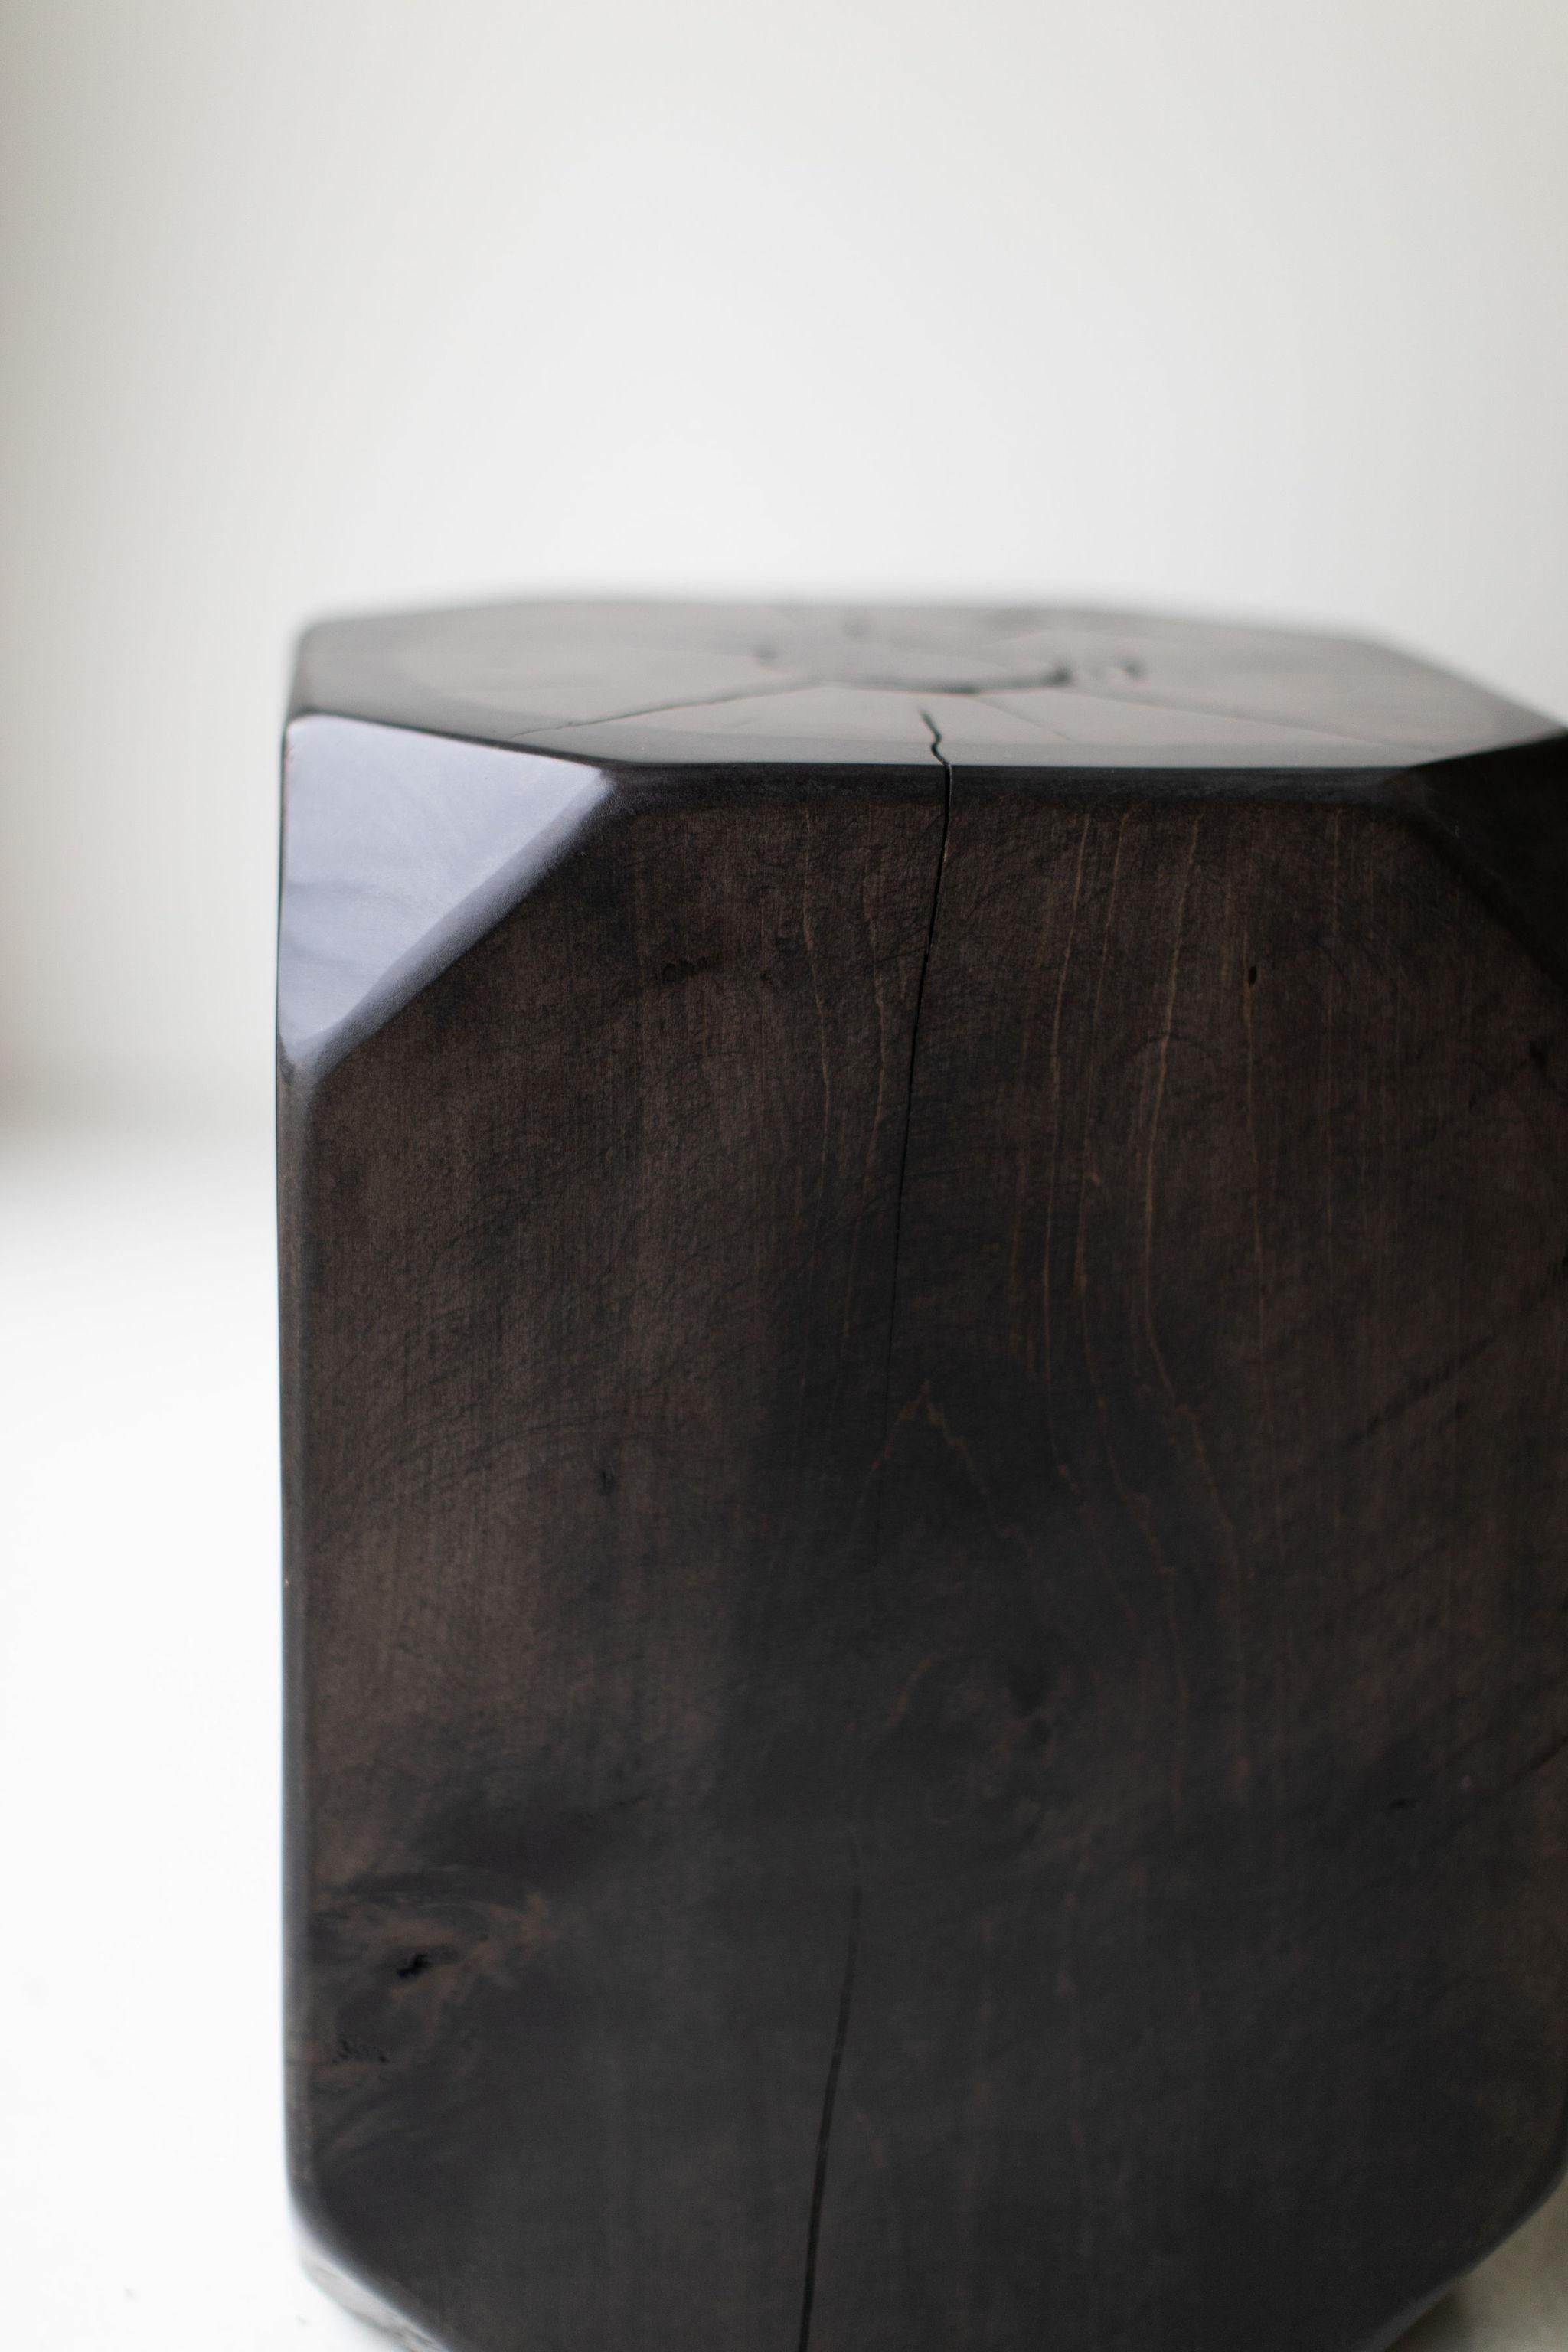 Bertu Side Tables, Dublin Large Side Table, Maple

Please scroll down to read IMPORTANT INSTRUCTIONS ABOUT OUR STUMPS before purchase!

Why buy BERTU stumps?

KILN DRIED

Our stumps all go through a drying process in our kiln, sometimes for up to a